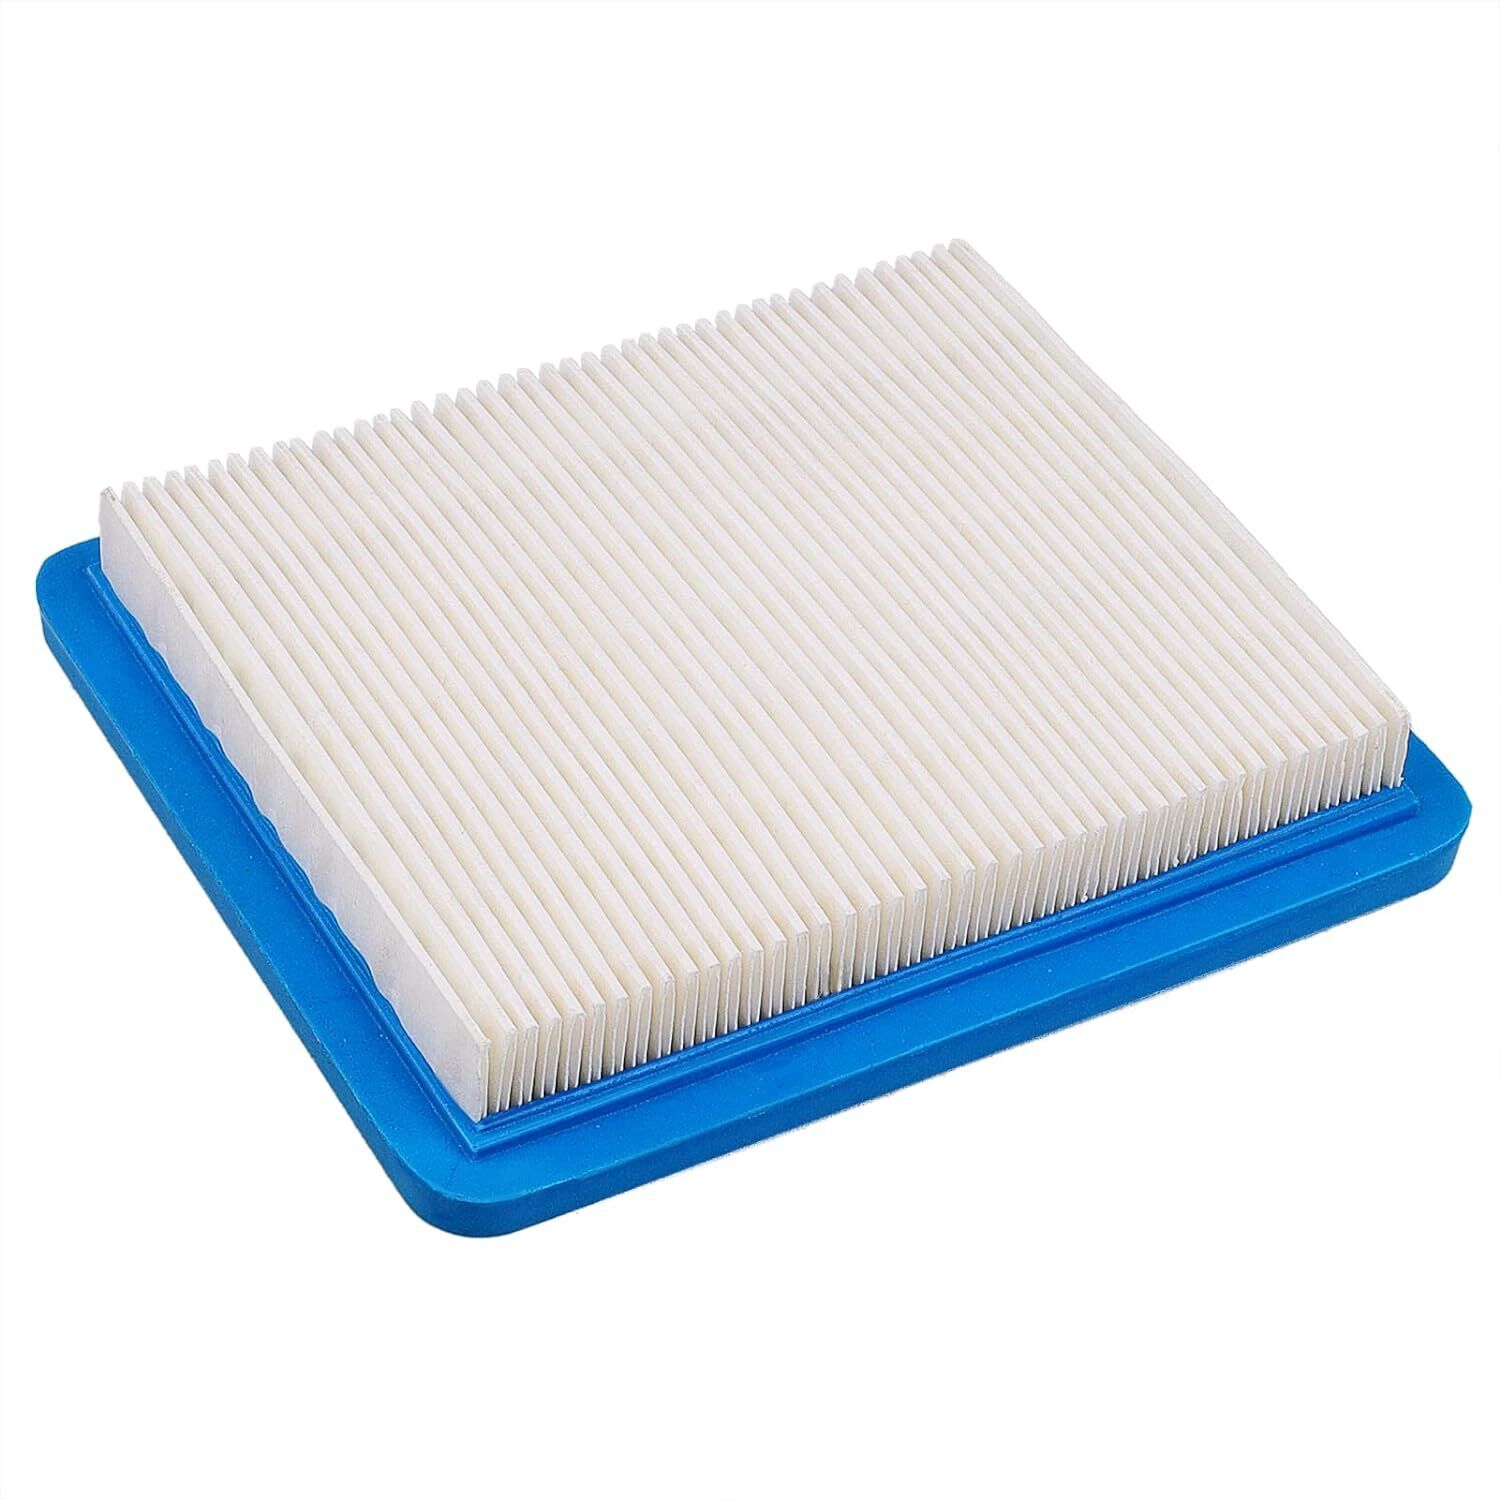 Air Filter Replace 17213-GET-000 for Honda Zoomer Ruckus Metro Dio Z4 NPSS50 200